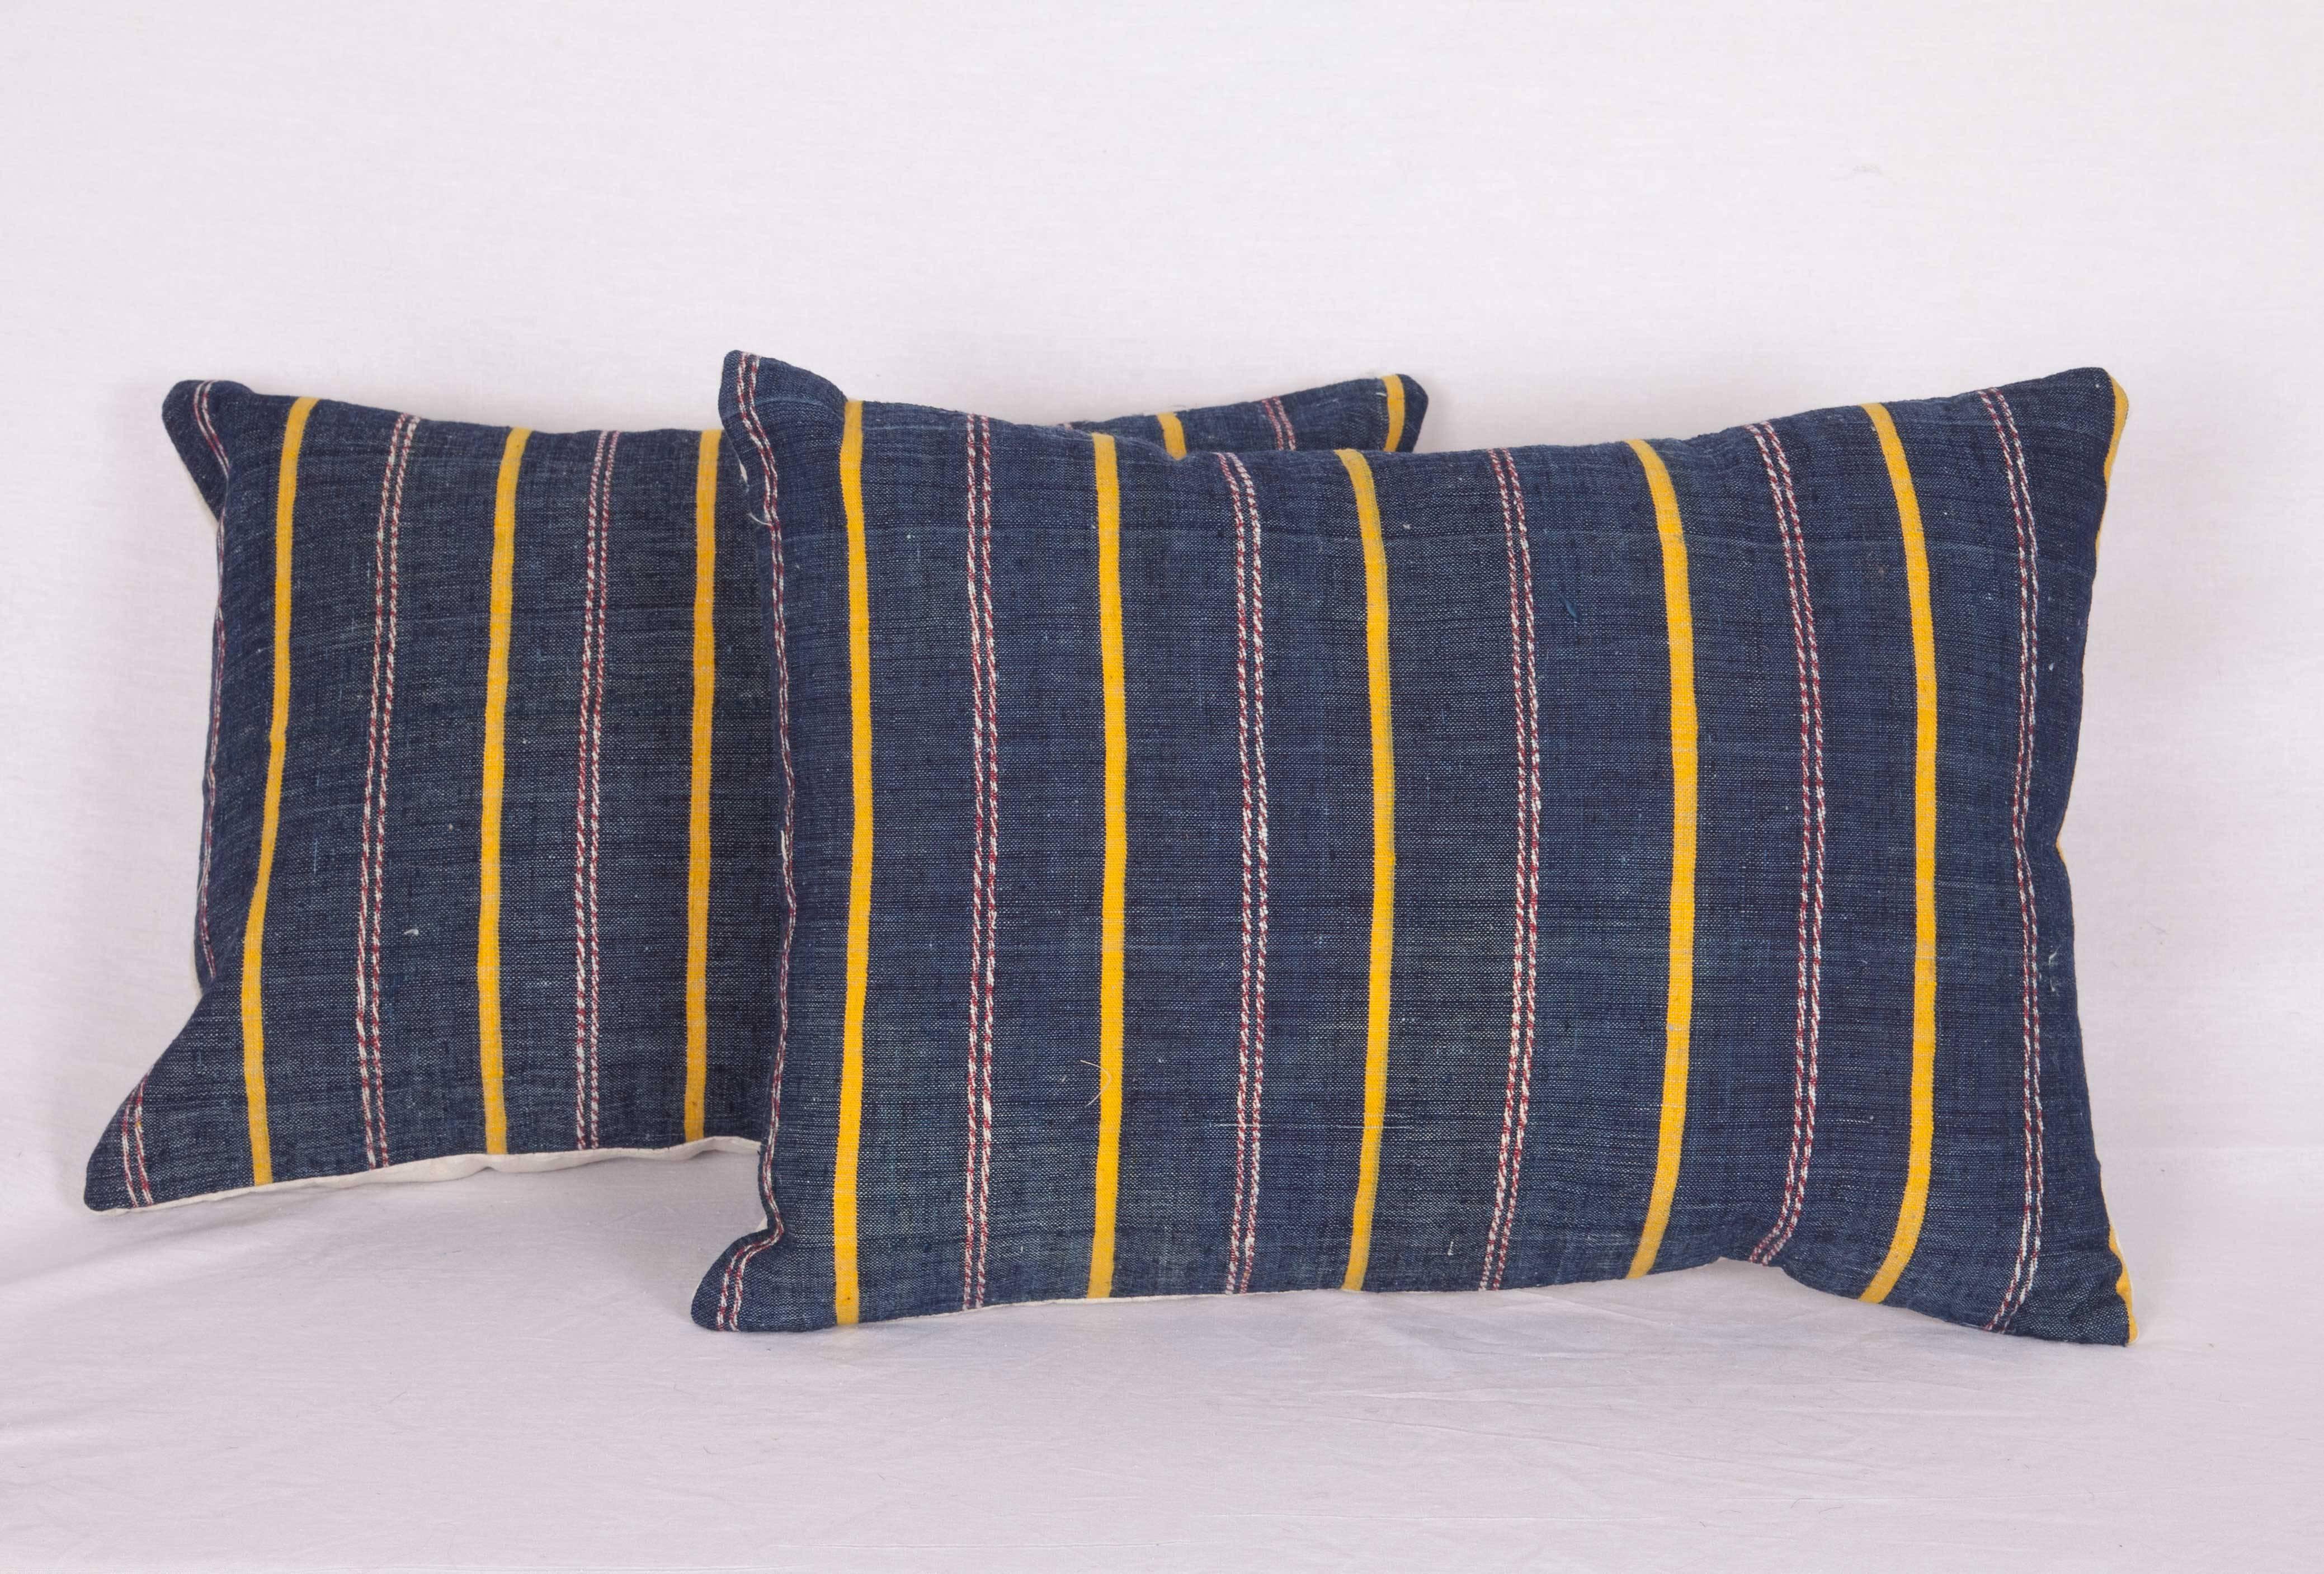 Hand-Woven Pillow Cases Fashioned Out of an Mid-20th Century Anatolian Kilim For Sale